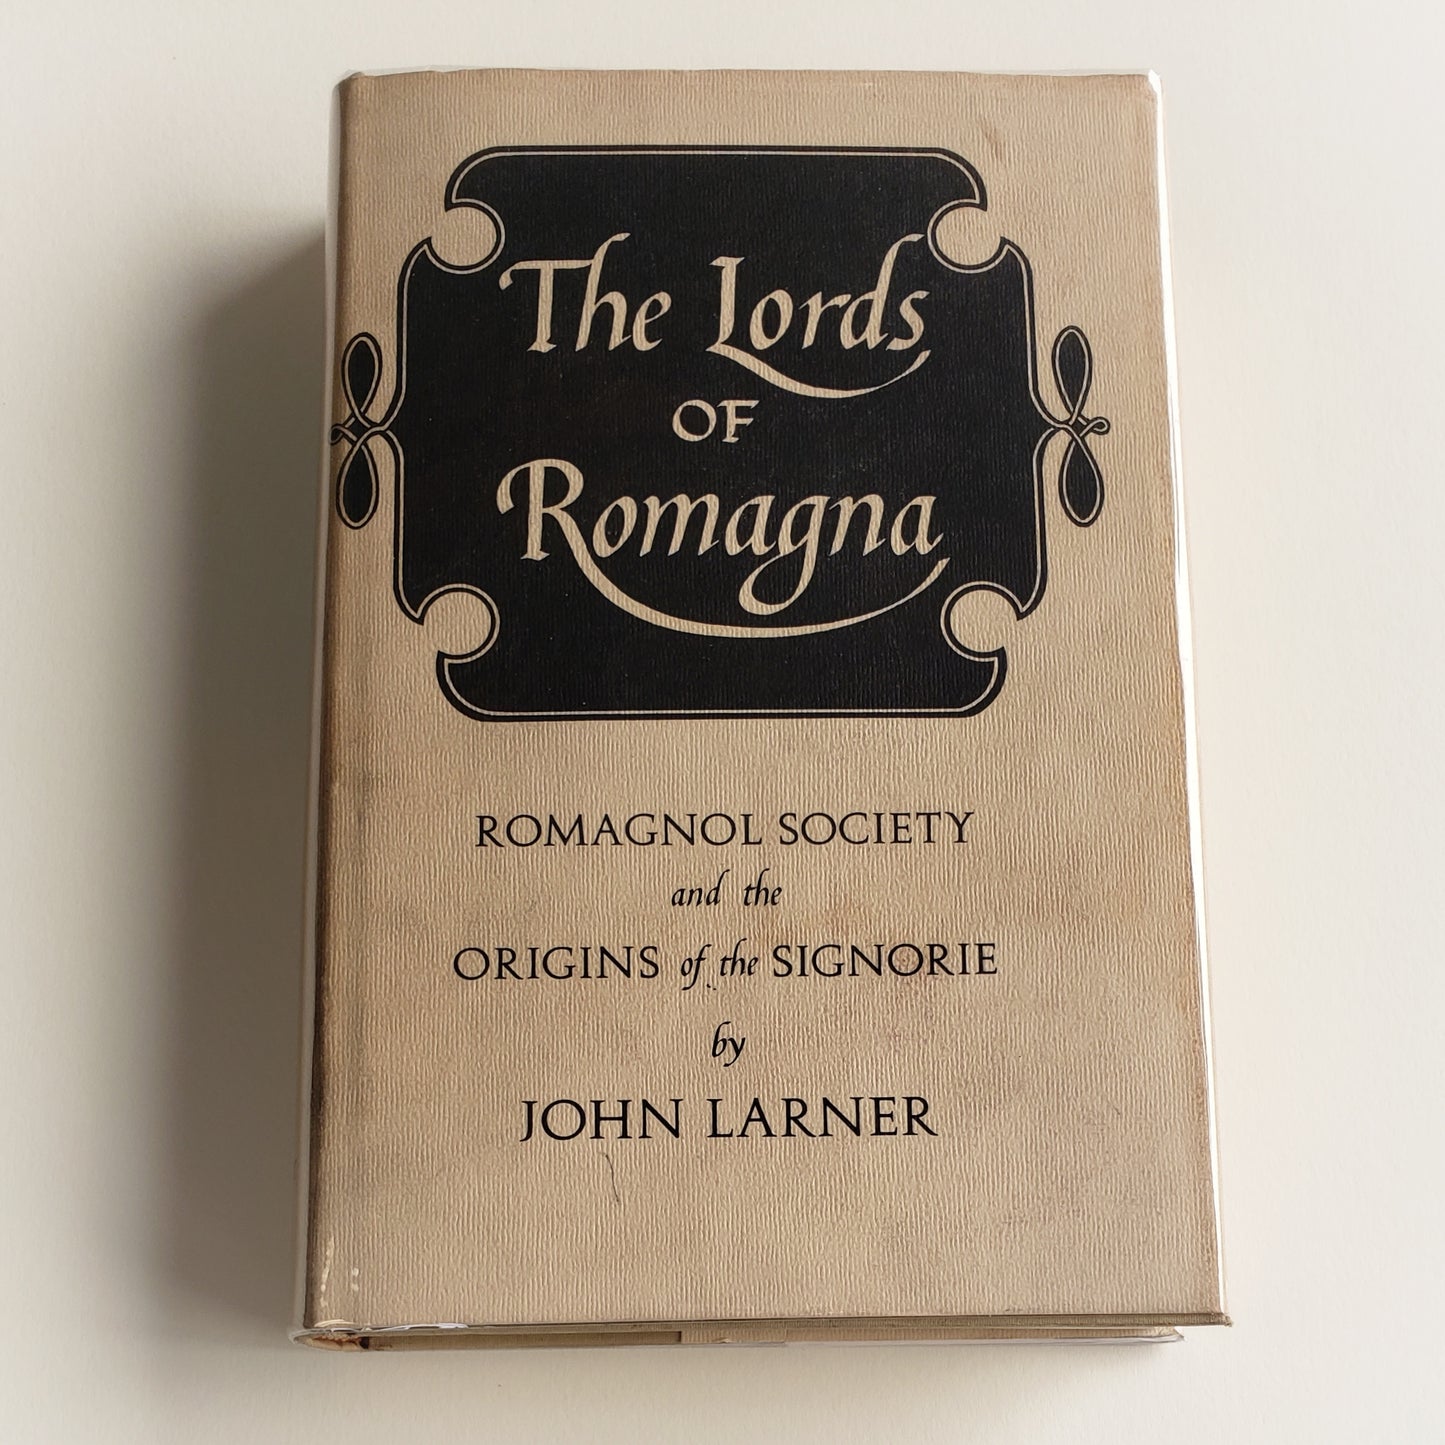 Vintage Book- The Lords of Romagna: Romagnol Society and the Origins of the Signorie by John Larner (Europe)